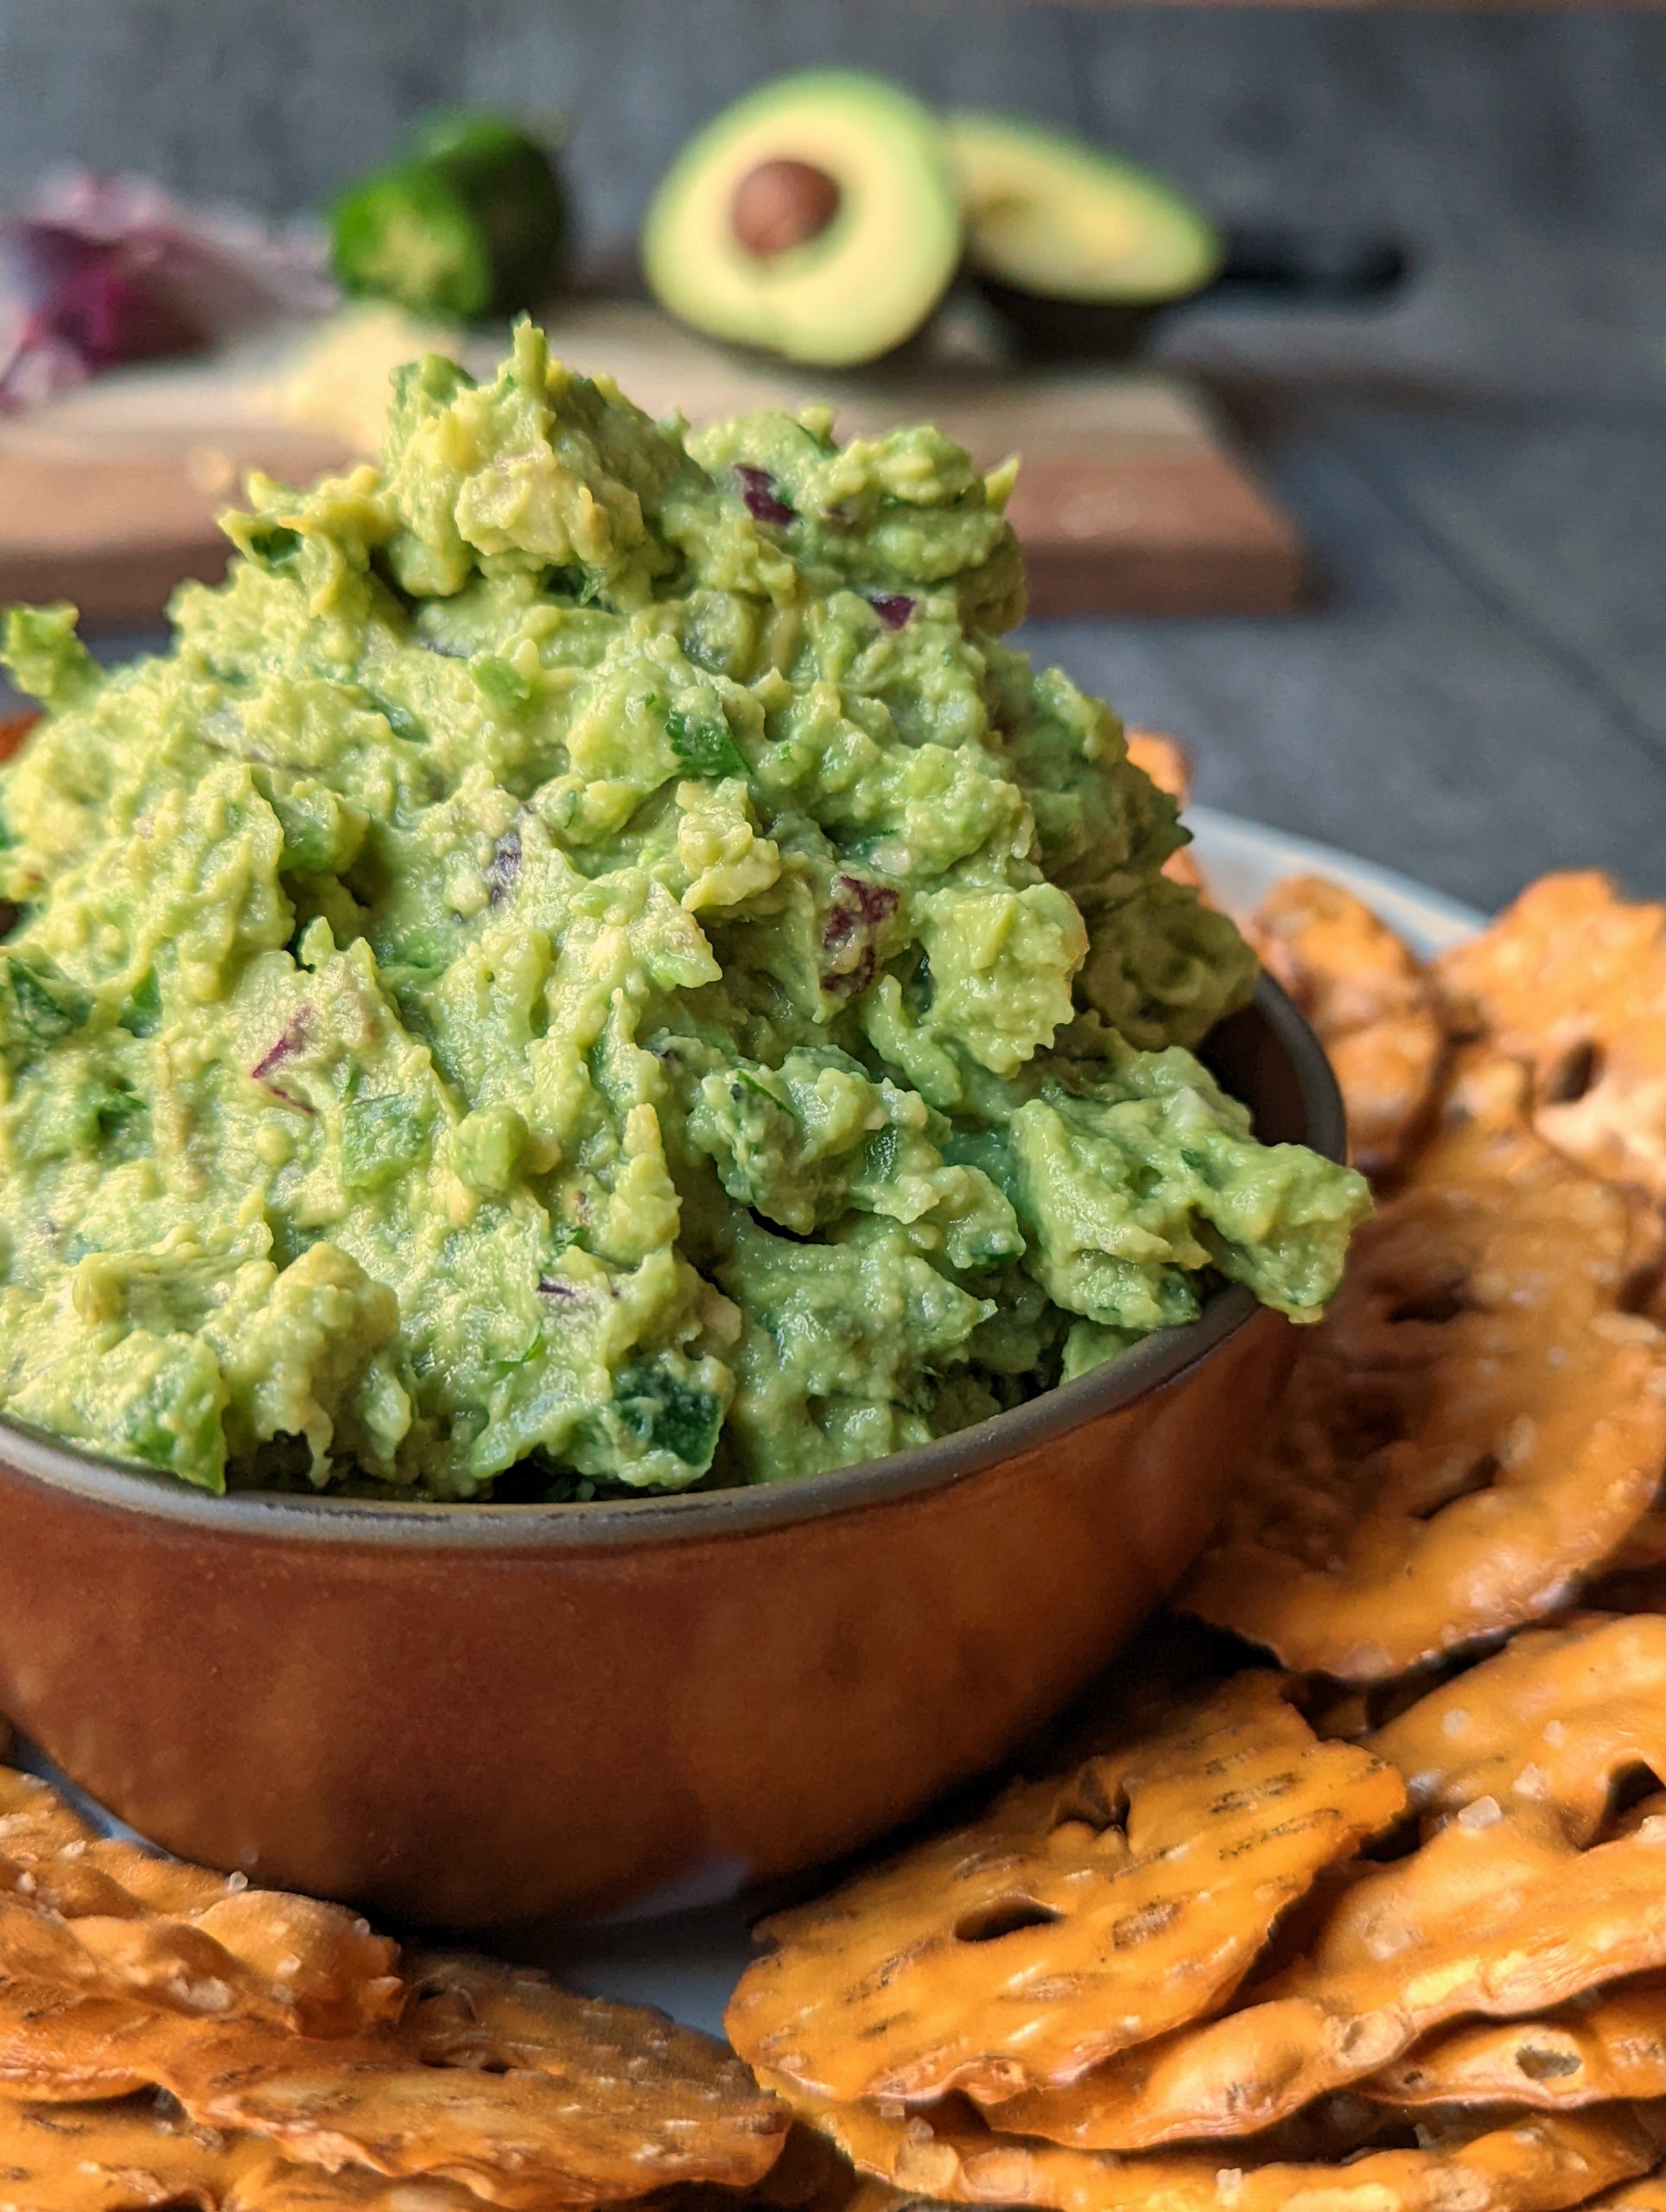 This is our simple guacamole recipe served with pretzel chips.